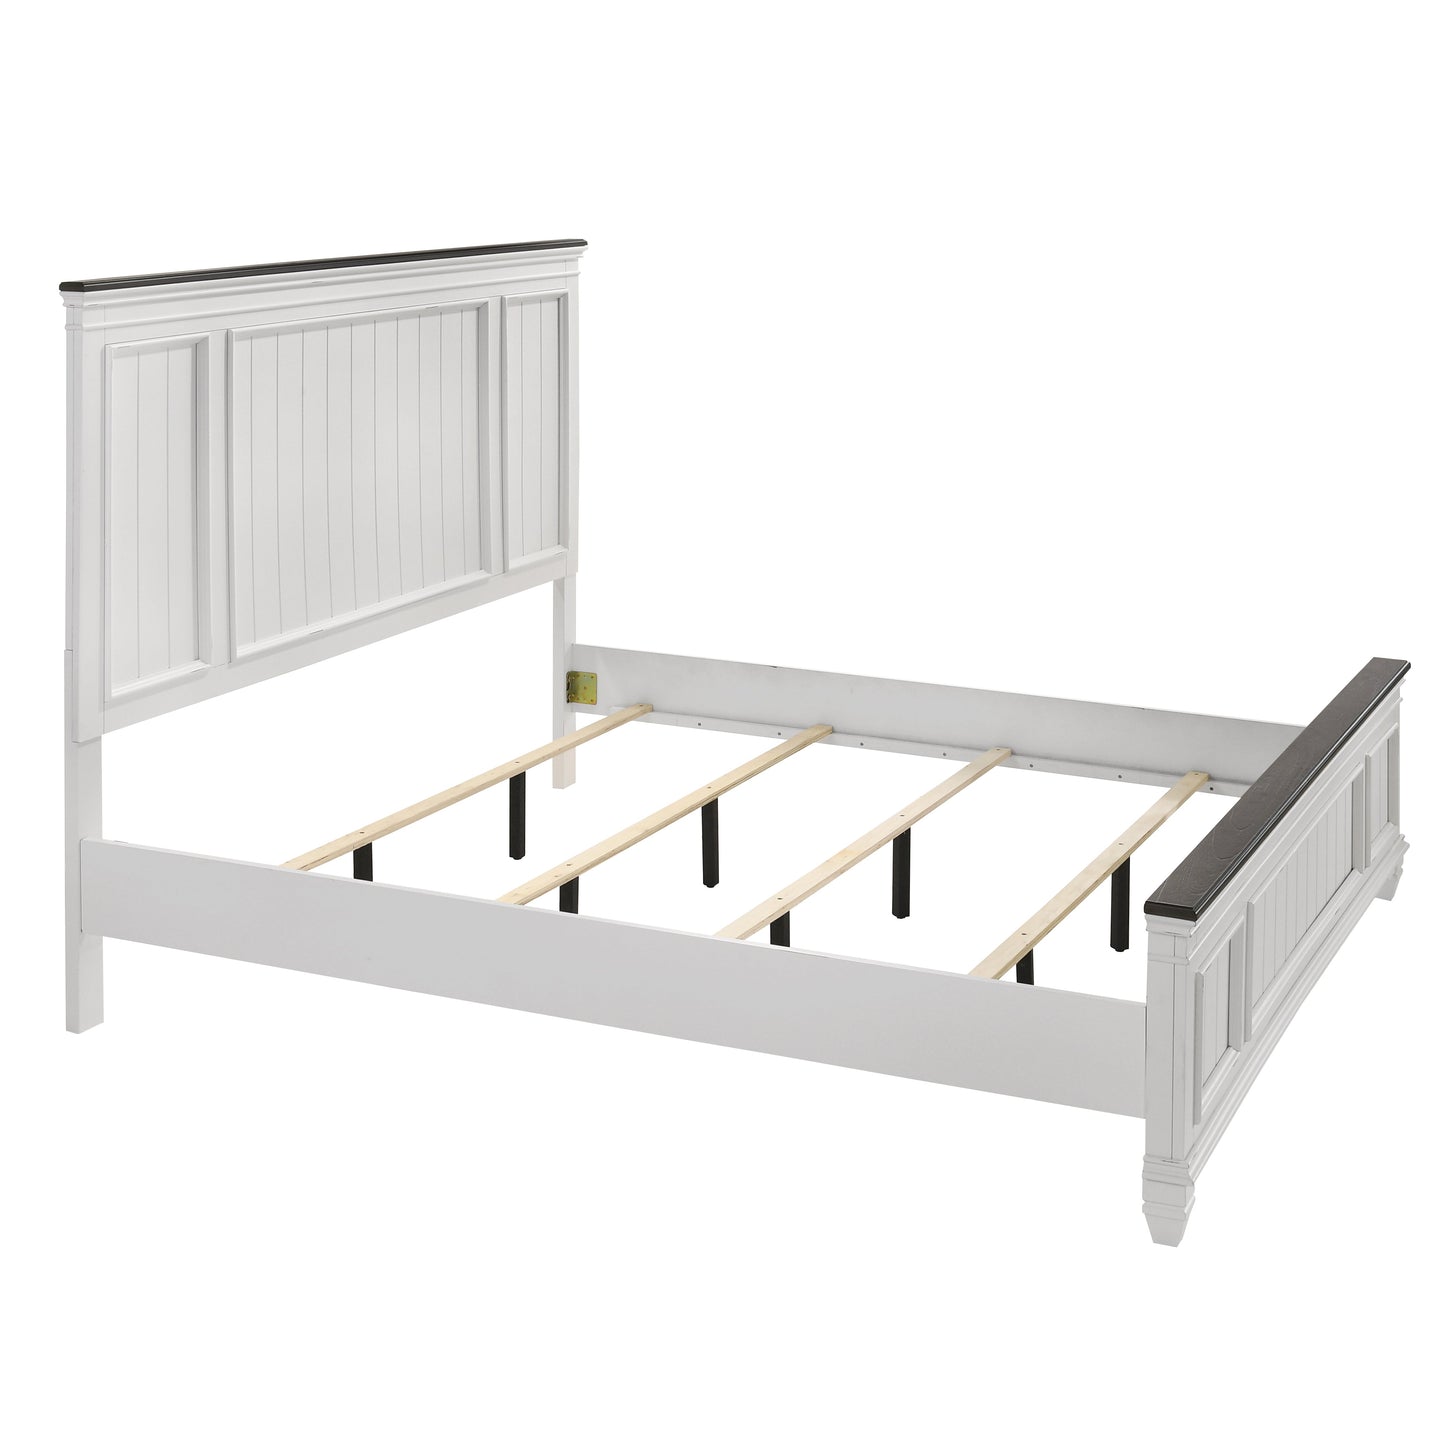 Clelane Shiplap Wood Panel Bed, Weathered White and Gray